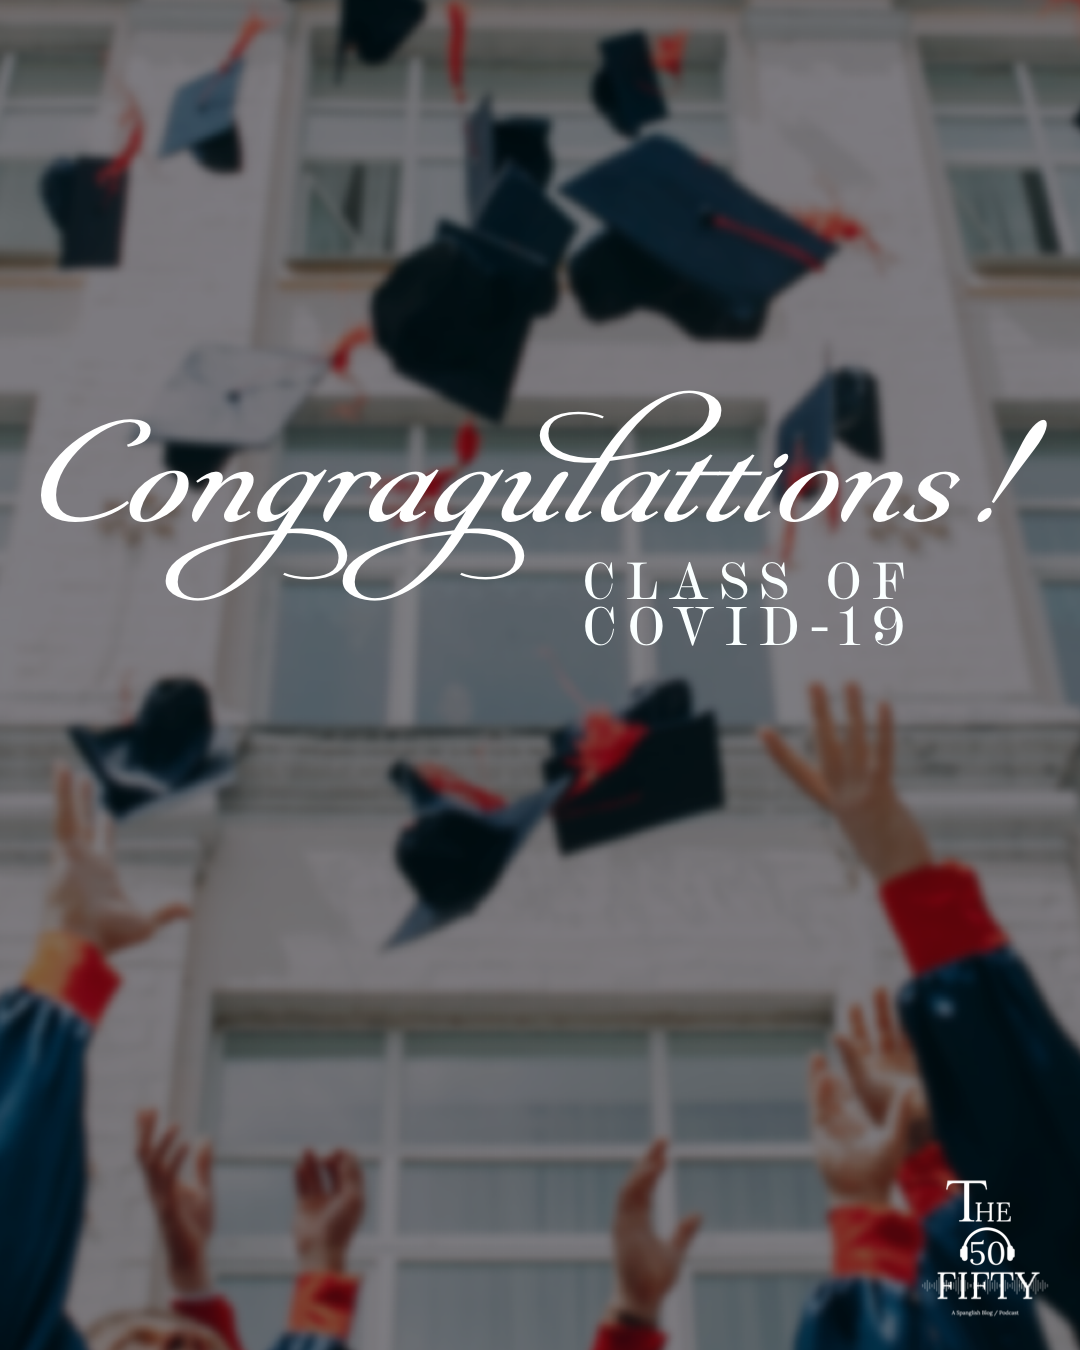 
                Congragulations Class of COVID-19
            